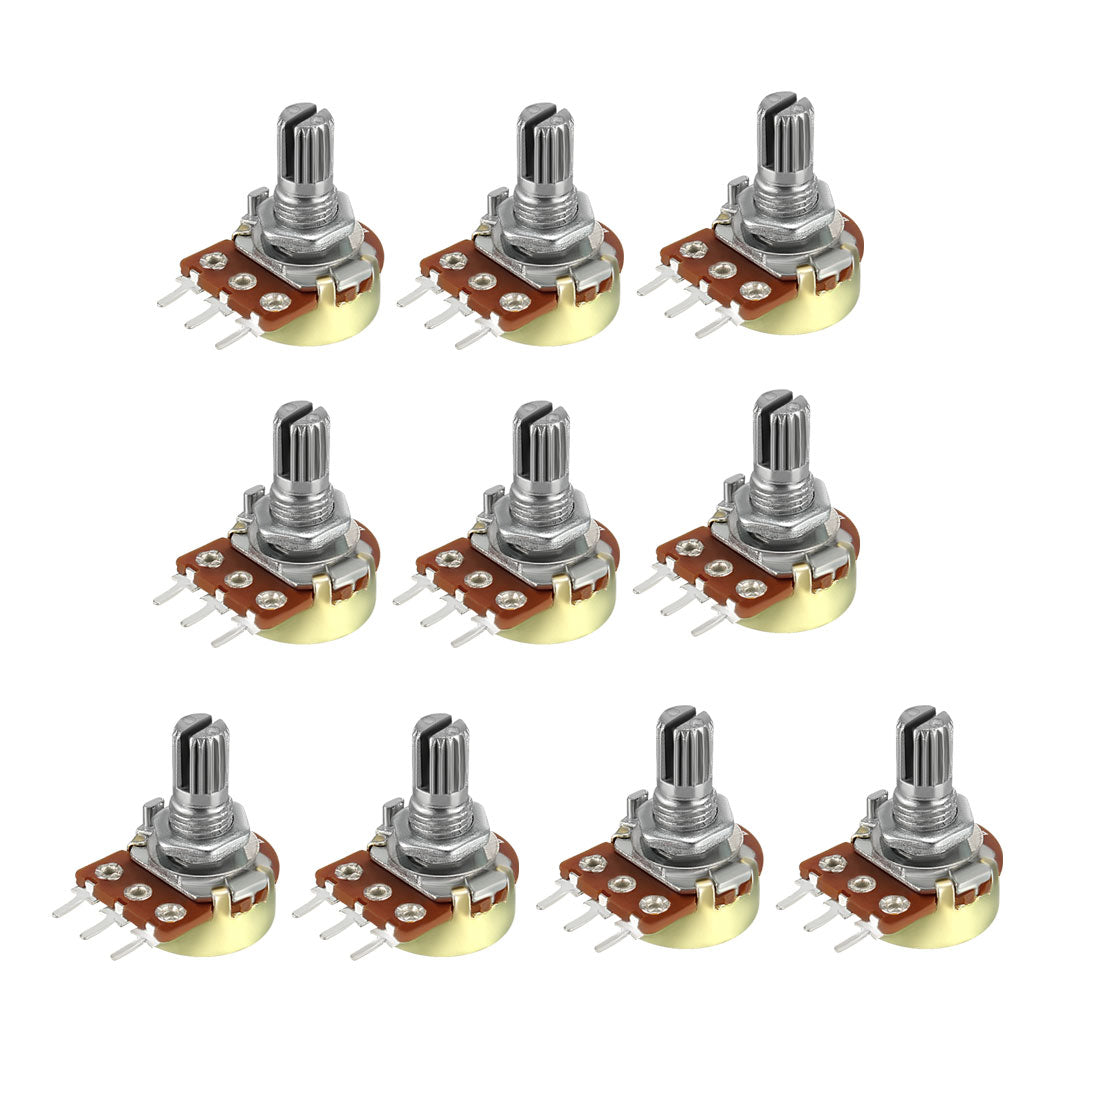 uxcell Uxcell WH148 50K Ohm Variable Resistors Single Turn Rotary Carbon Film Taper Potentiometer 10pcs